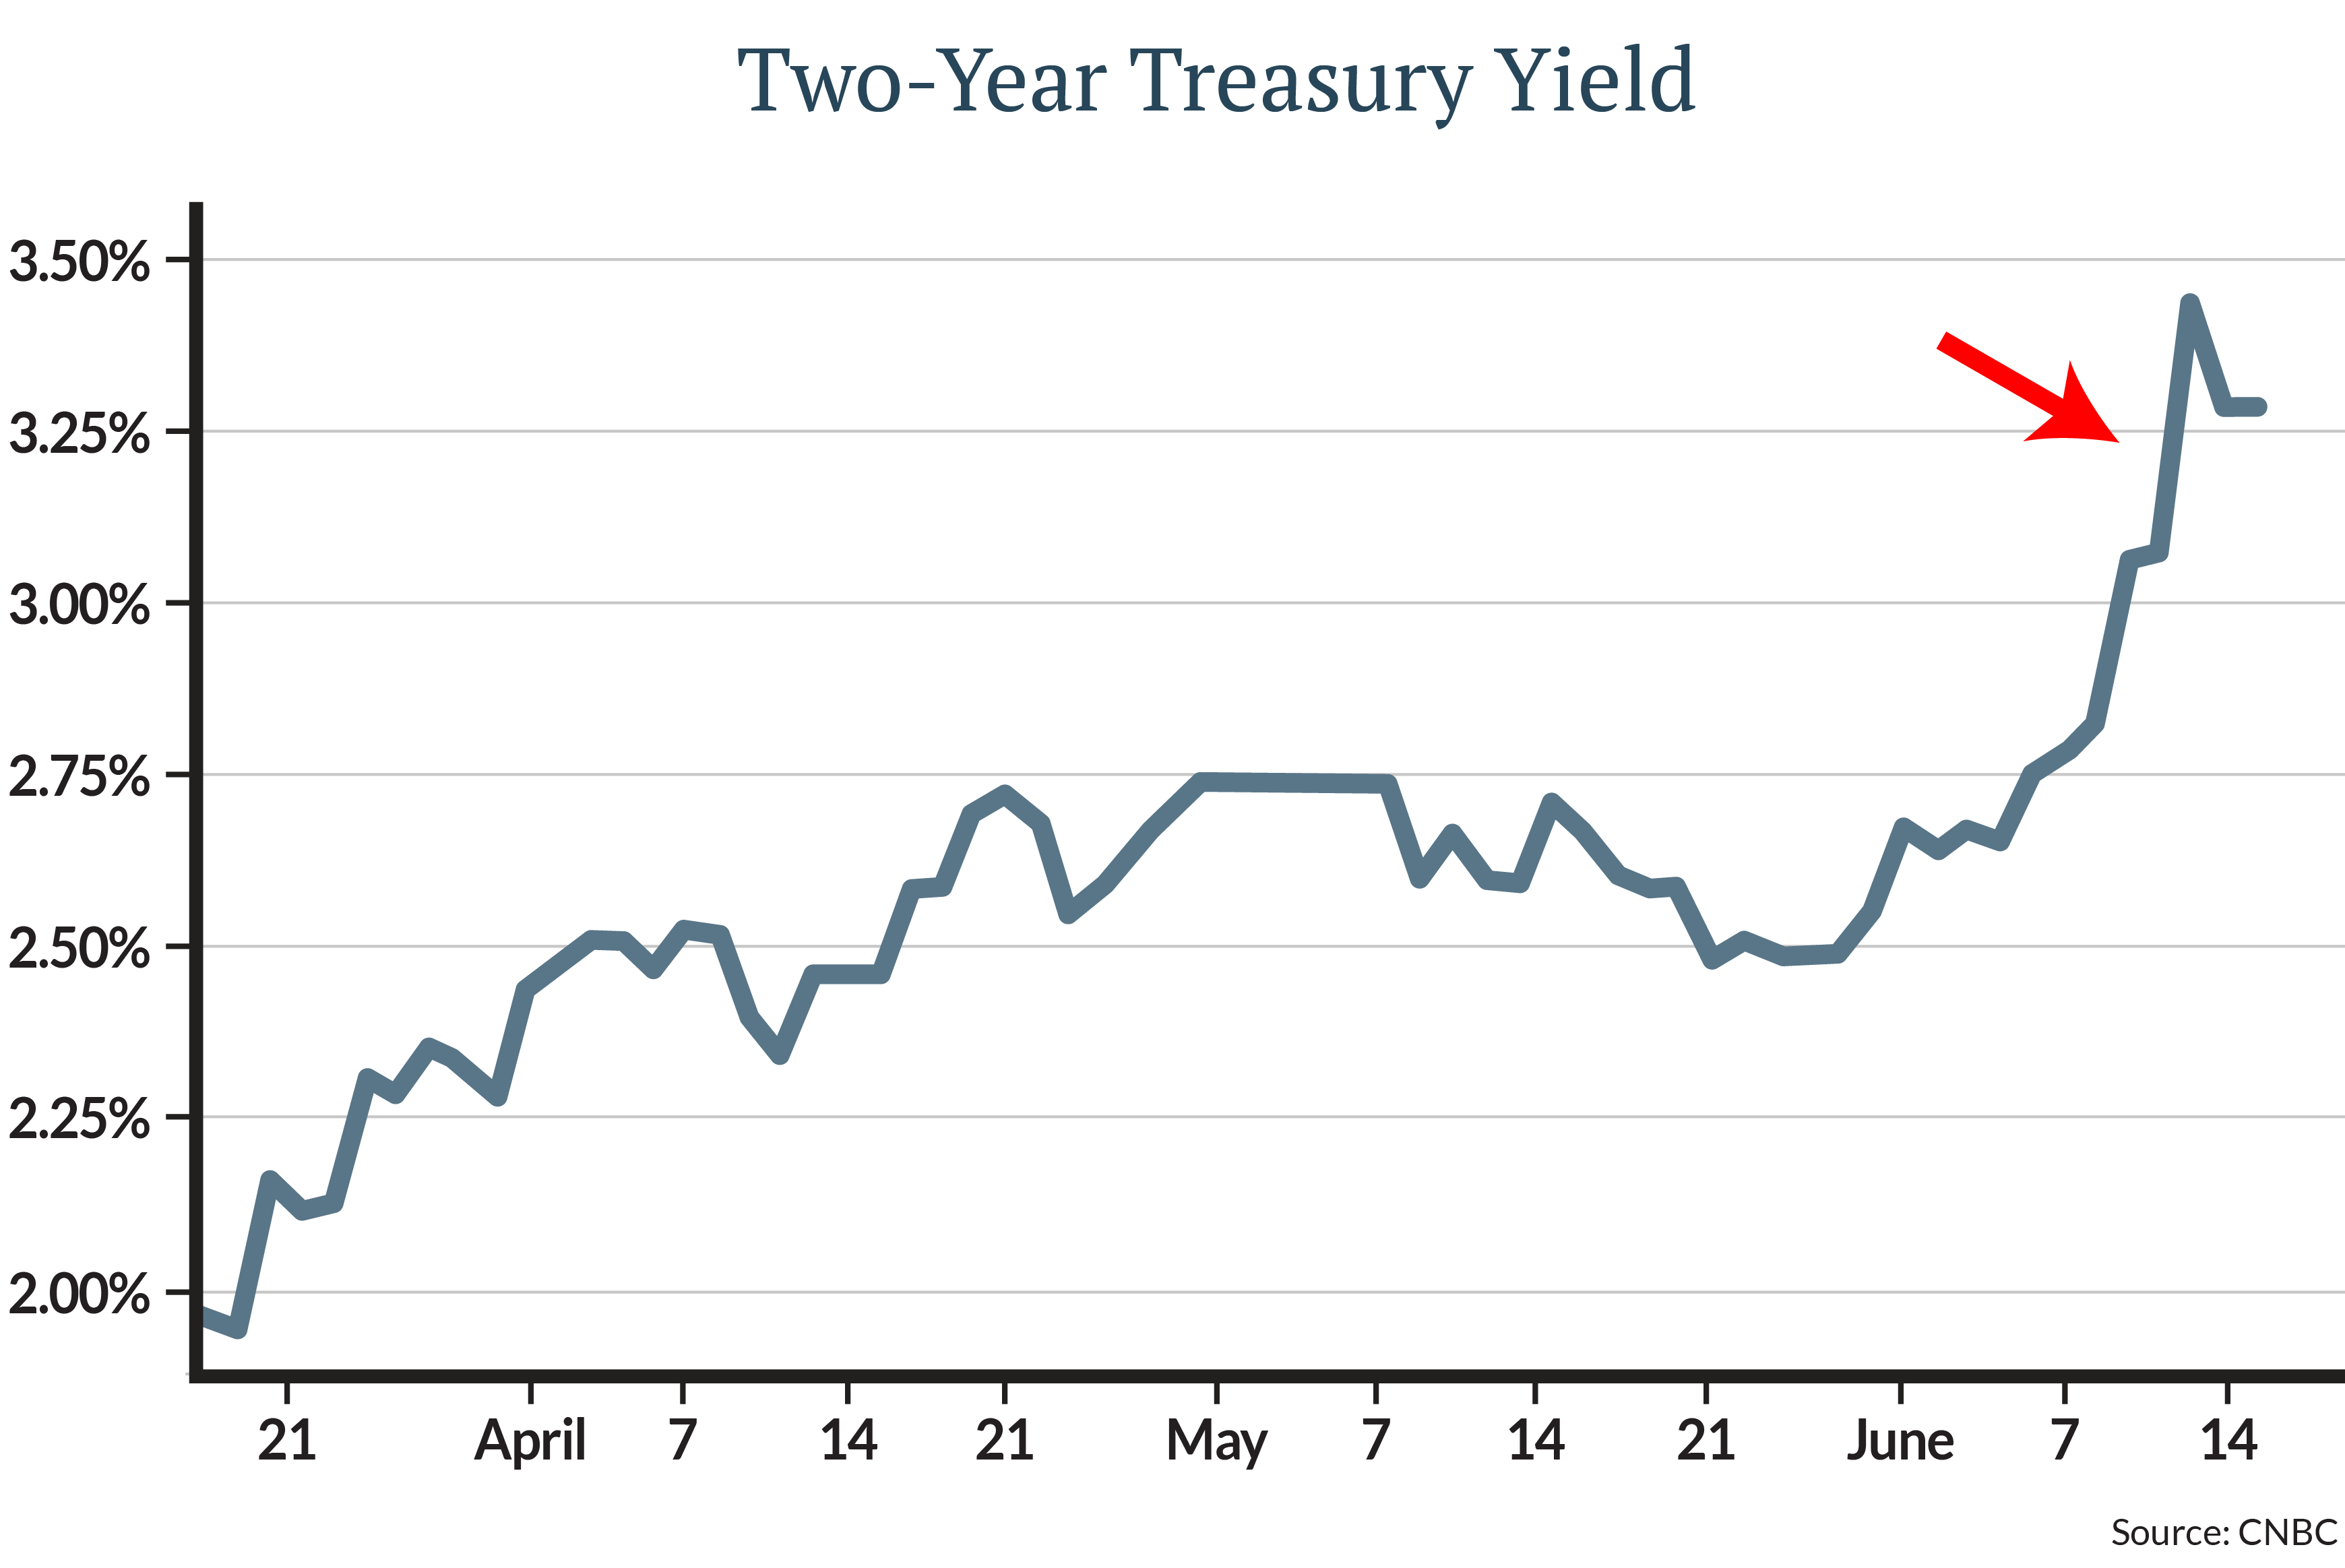 The yield chart for the two-year Treasury shows how the market anticipated the higher increase after last Friday’s Consumer Price Index (CPI) figure and the University of Michigan Inflation Expectations report. The two-year yield rose from 3.06% to more than 3.4% over the weekend.